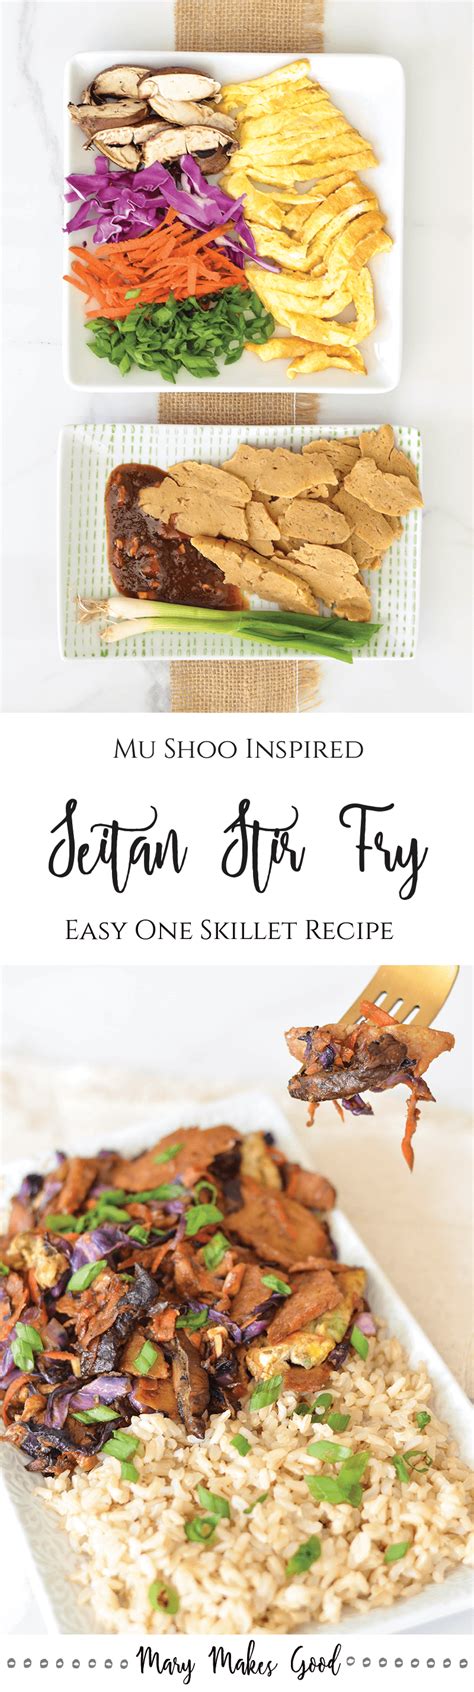 How does Seitan Moo Shoo fit into your Daily Goals - calories, carbs, nutrition